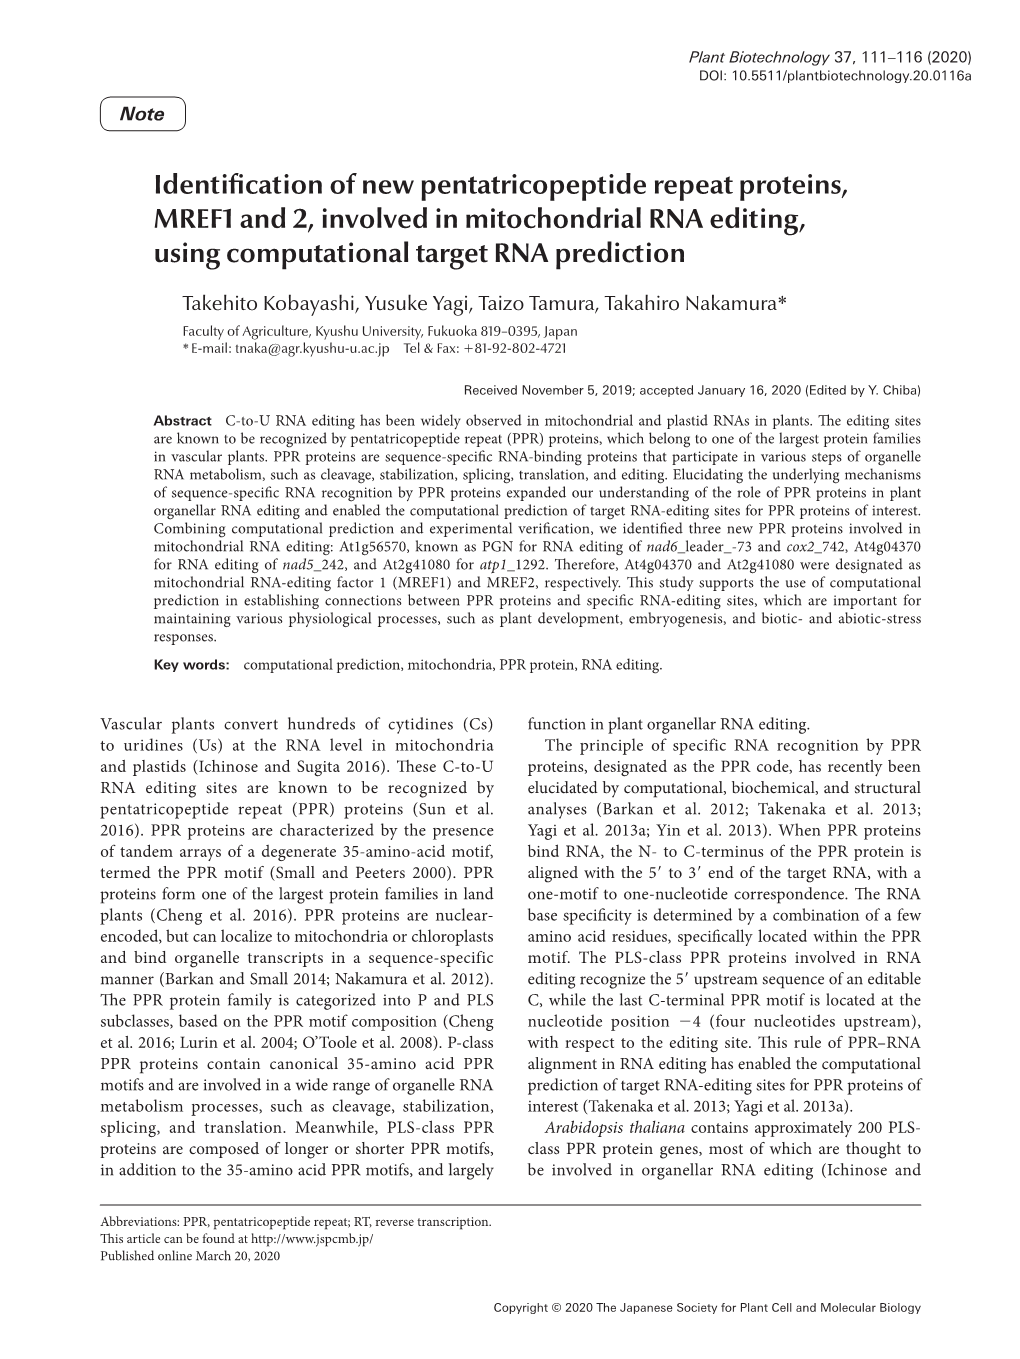 Identification of New Pentatricopeptide Repeat Proteins, MREF1 and 2, Involved in Mitochondrial RNA Editing, Using Computational Target RNA Prediction